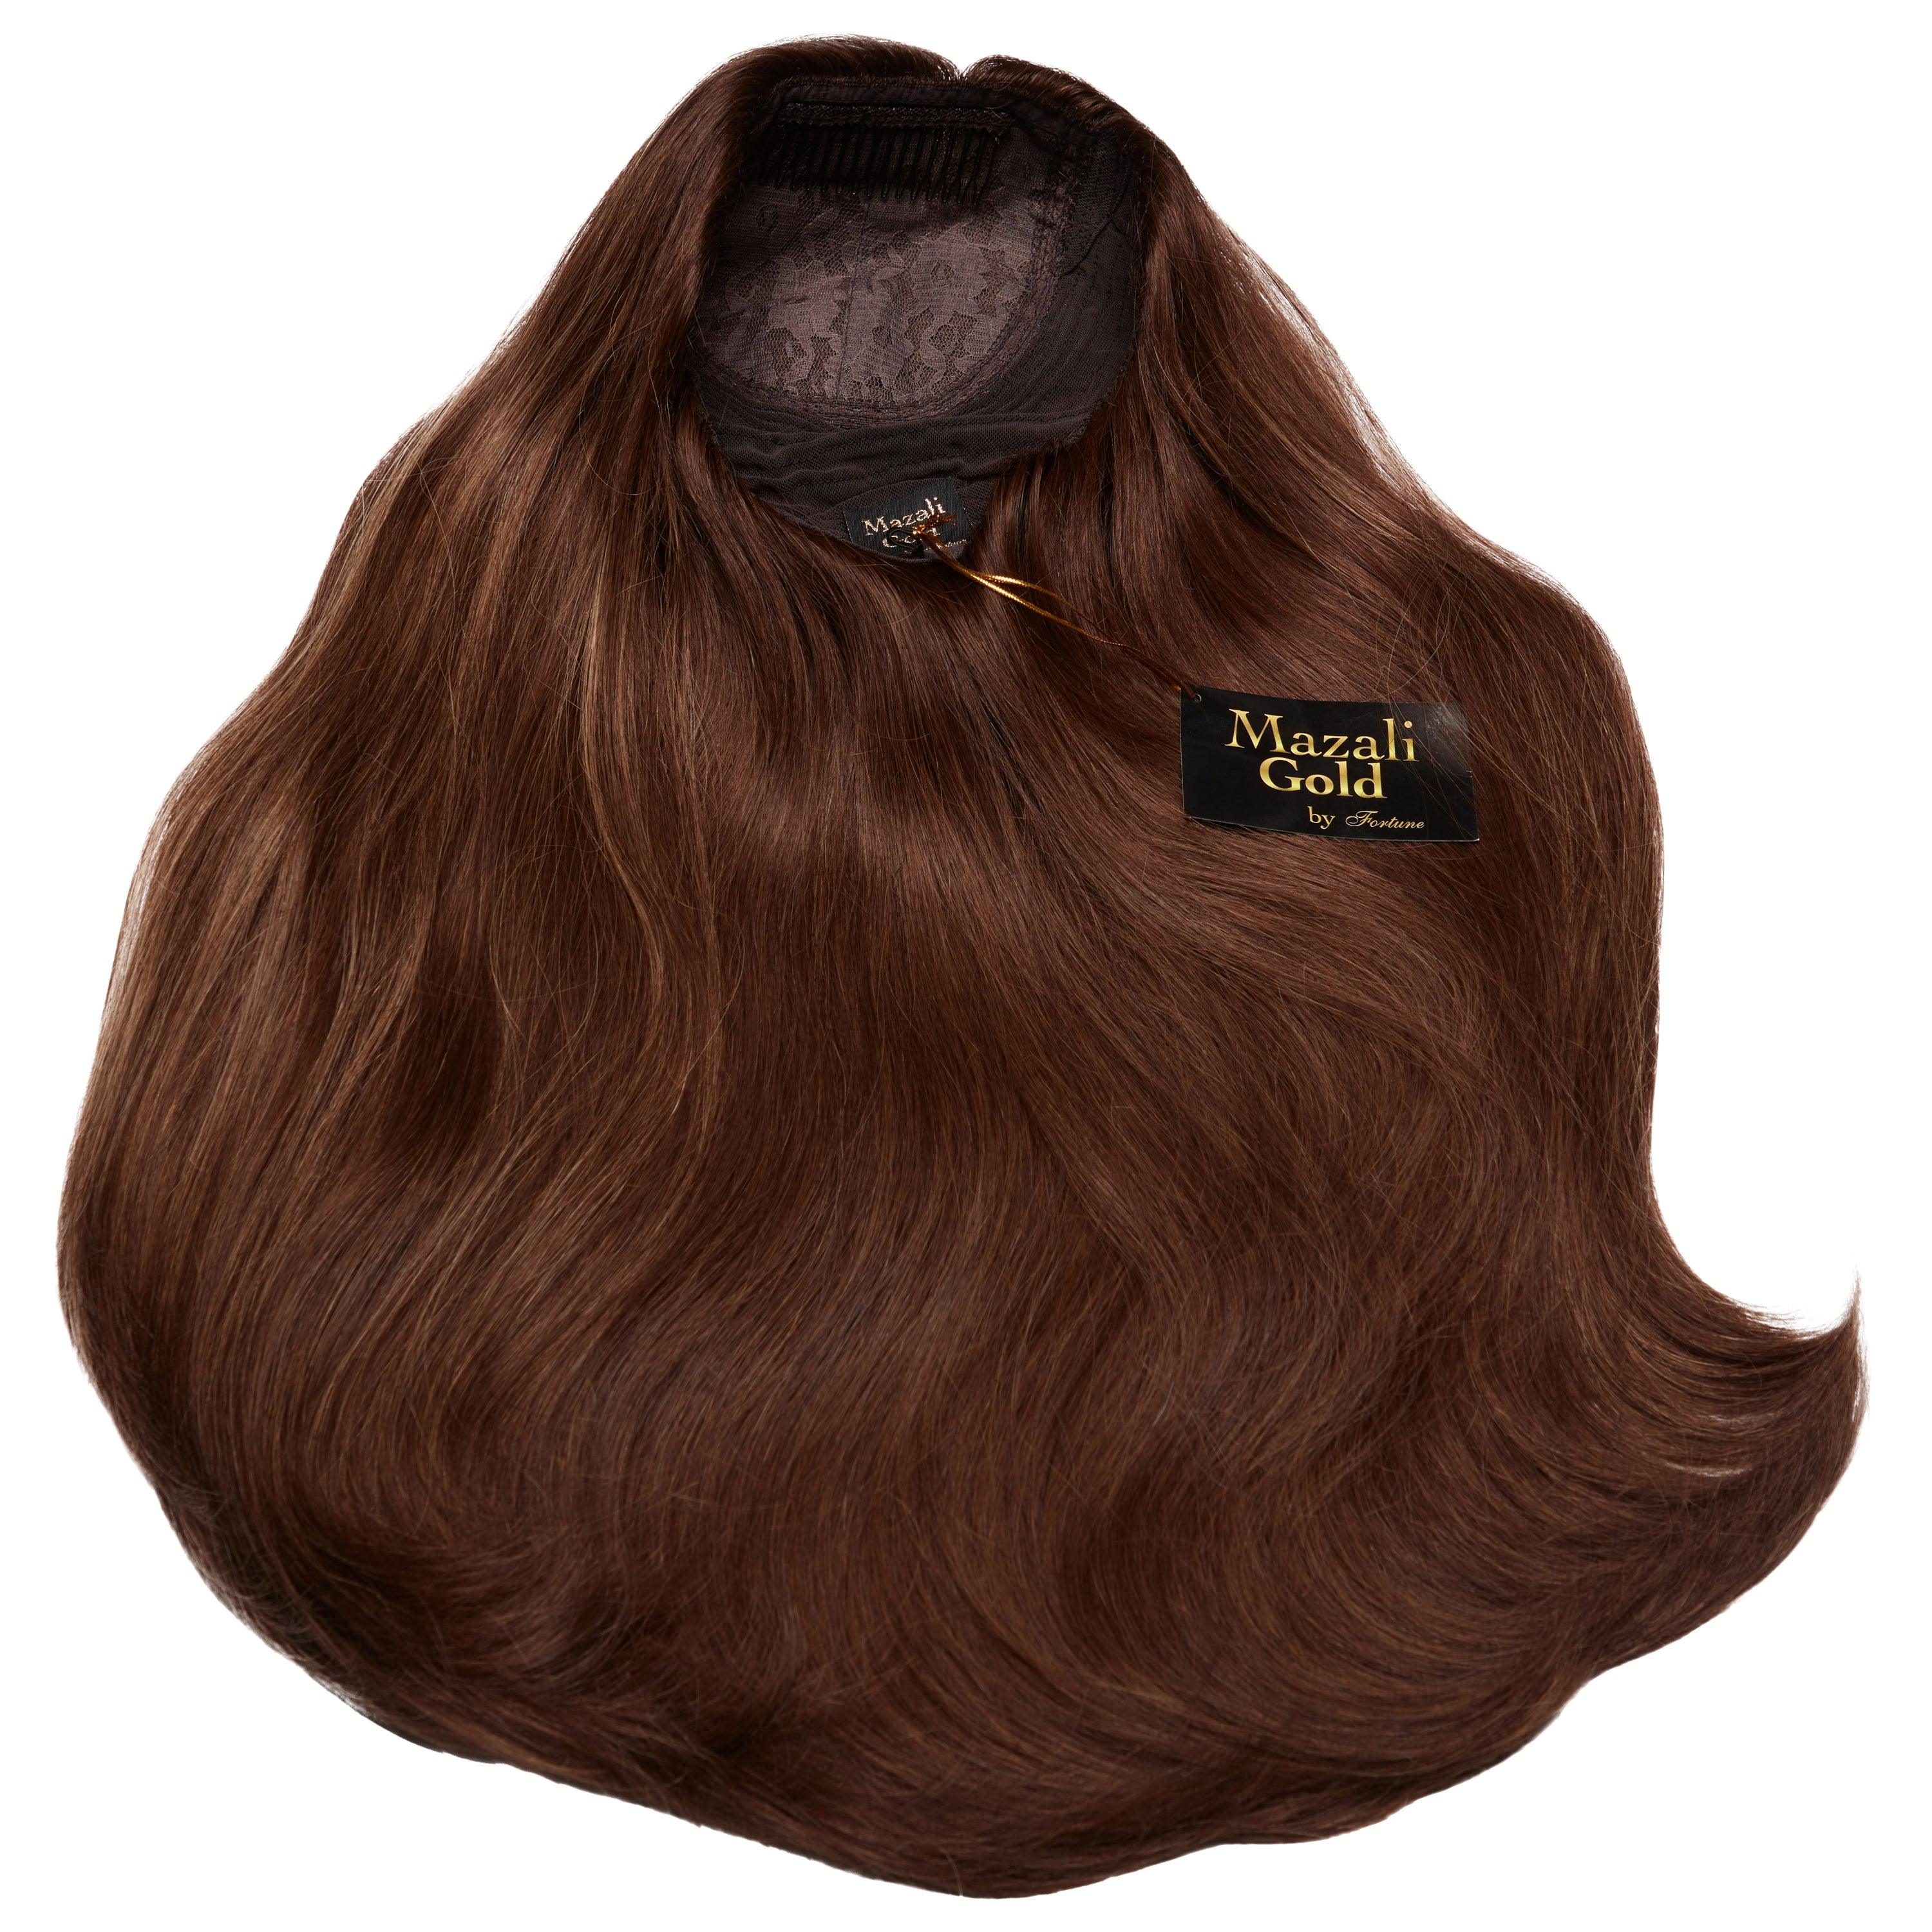 #6-8 MEDIUM BROWN SILK FRENCH TOP WIGS - Fortune Wigs